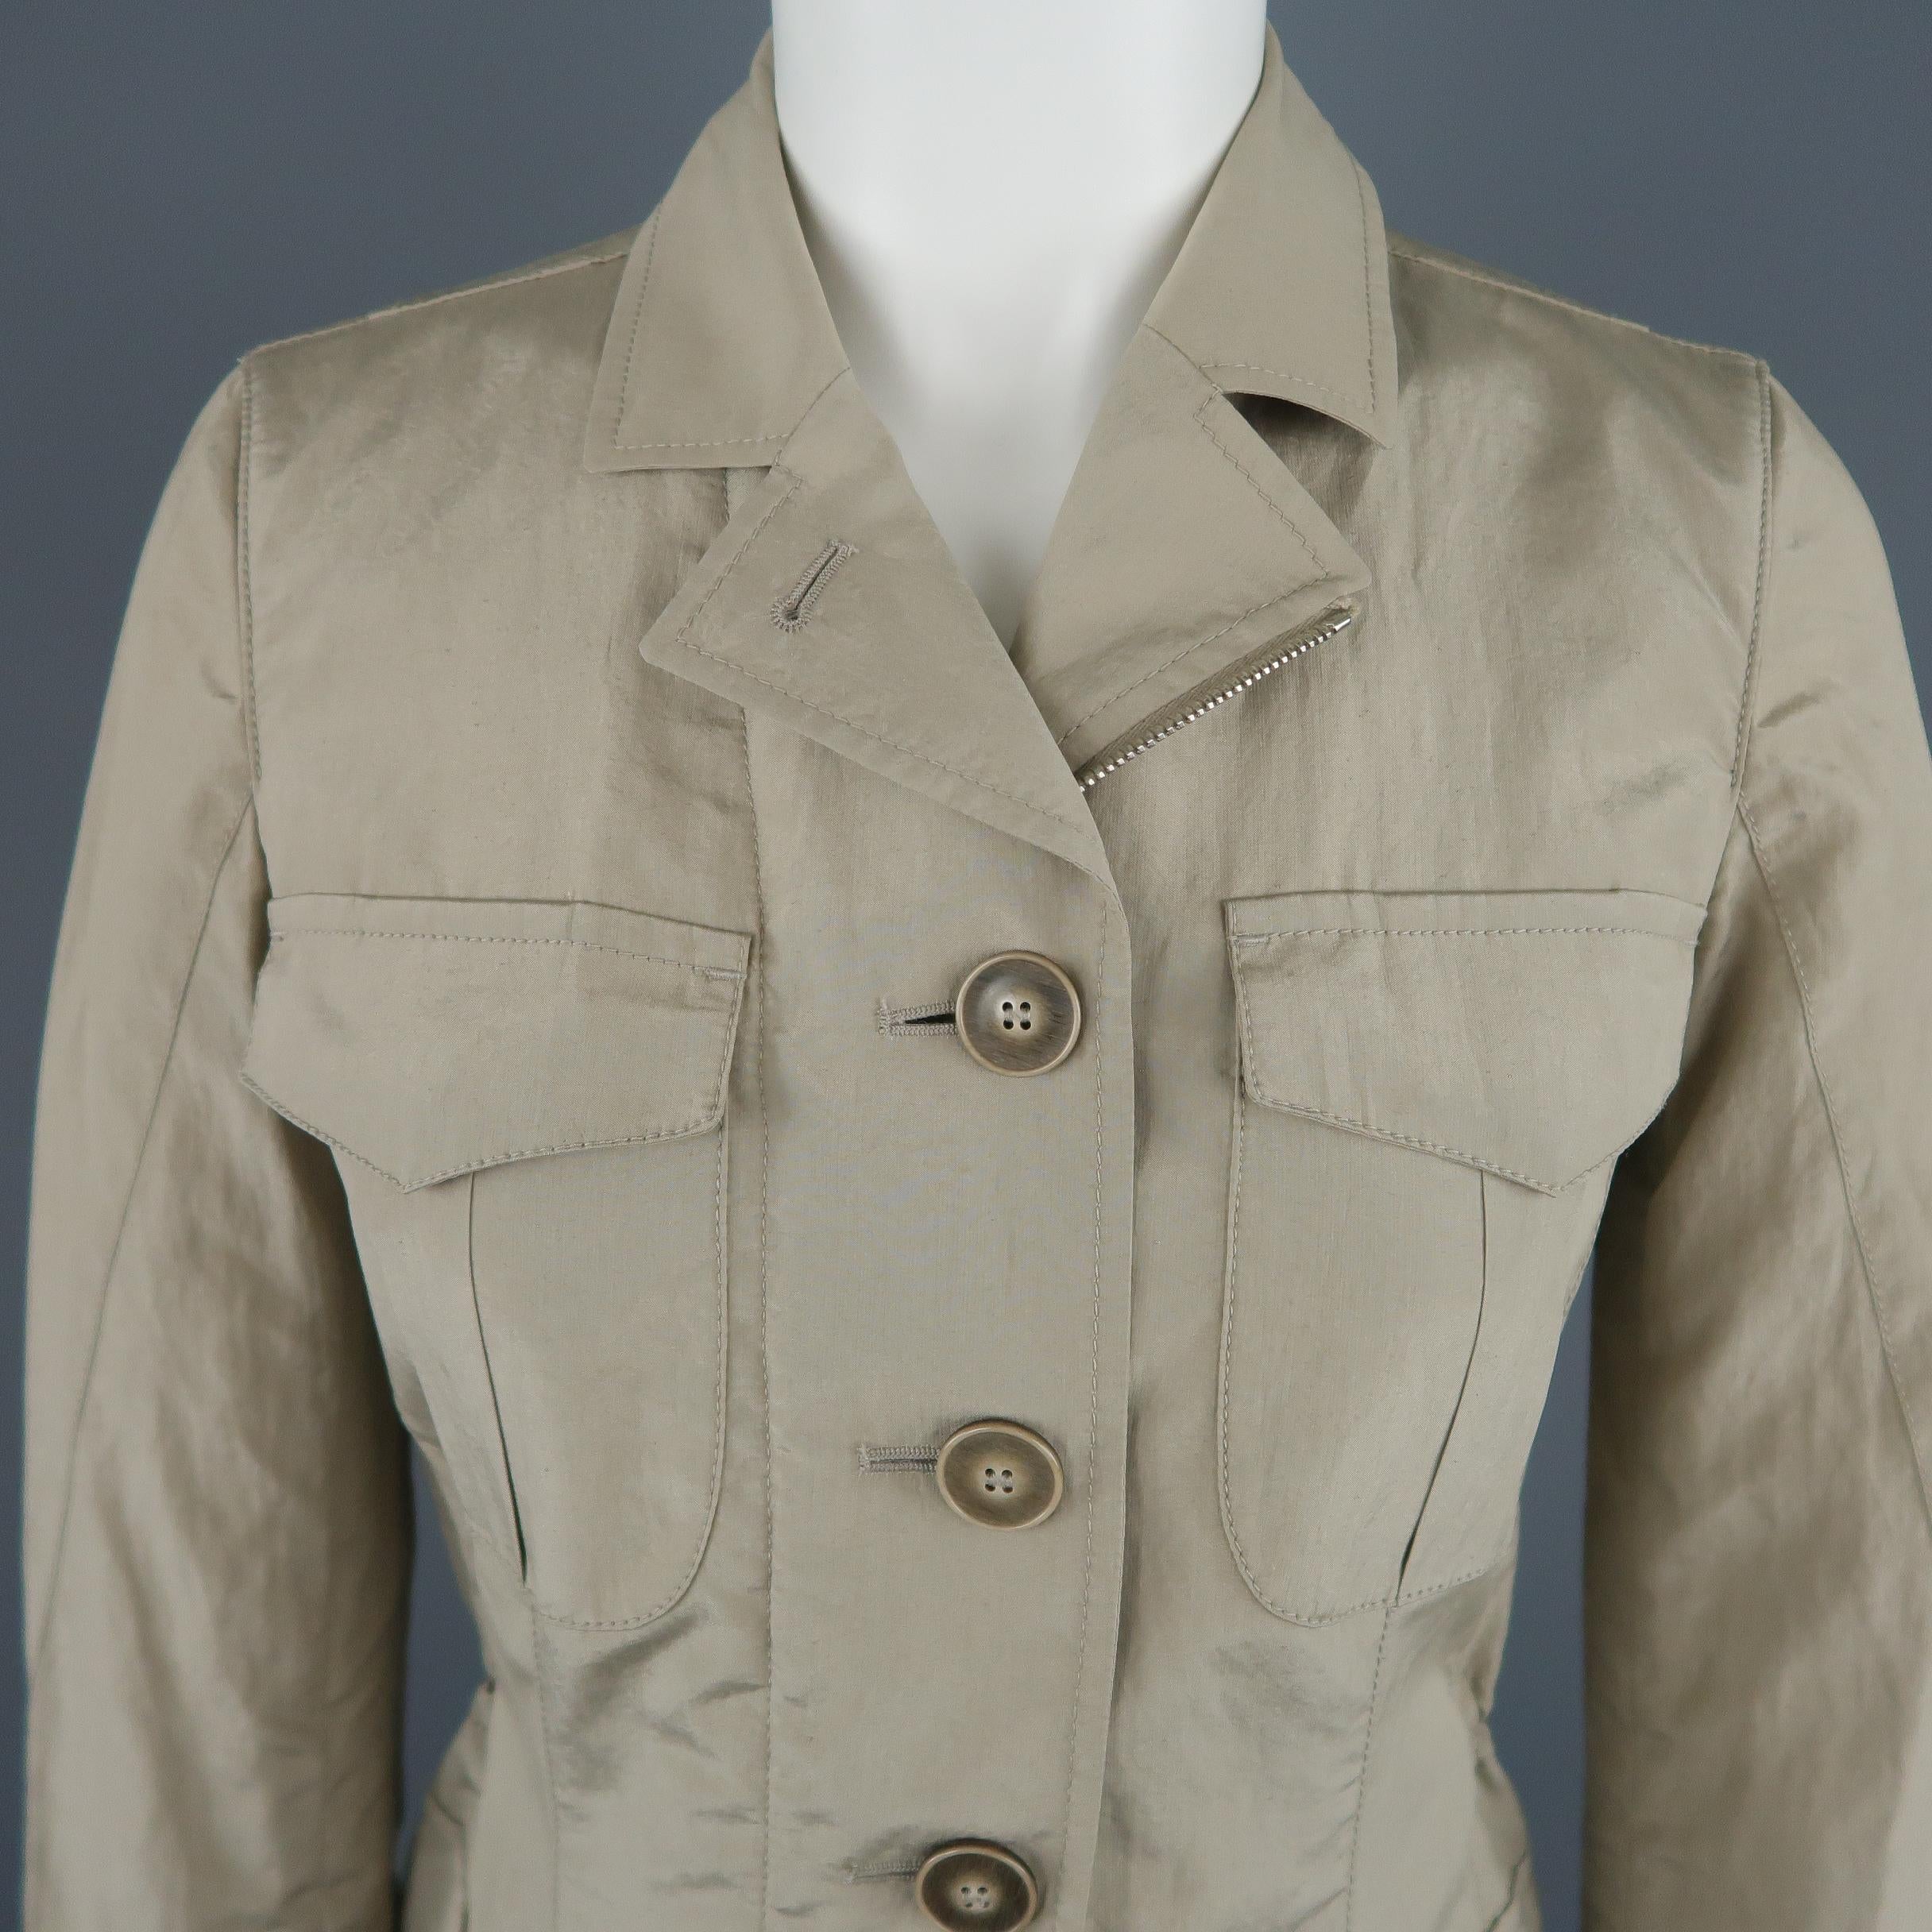 GIORGIO ARMANI Safari style jacket comes in khaki silk blend taffeta with a double zip and button closure, patch flap pockets, pointed collar, functional button cuffs, and elastic drawstring waist. Made in Italy.
 
Excellent Pre-Owned